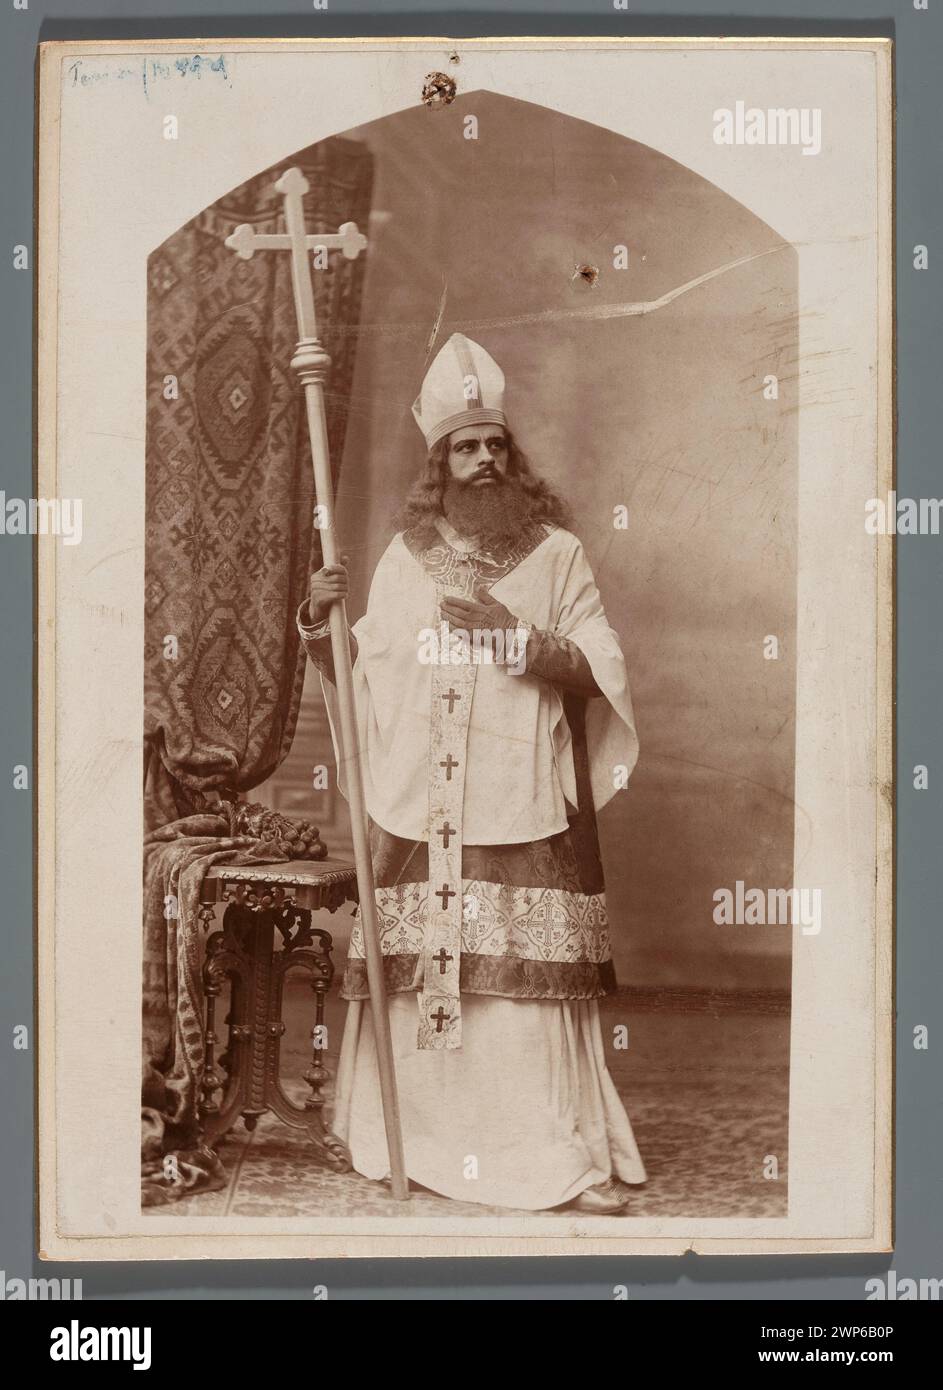 Portrait of Mikha A Tarasiewicz (1871-1923), an actor, in a stage costume (all in a clergy costume);  around 1901 (1900-00-00-1904-00-00);Rajchman, Aleksander (1855-1915), Rajchman, Aleksander (1855-1915)-dedication for, Rajchman, Aleksander (1855-1915)-collection, Tarasiewicz, Michał (1871-1923)-dedication from, Tarasiewicz, Michał (1871- 1923) - iconography, actors, dedications, theater costumes, Poland (culture), portraits, men's portraits, message (provenance), theater (artist), clergy outfits Stock Photo